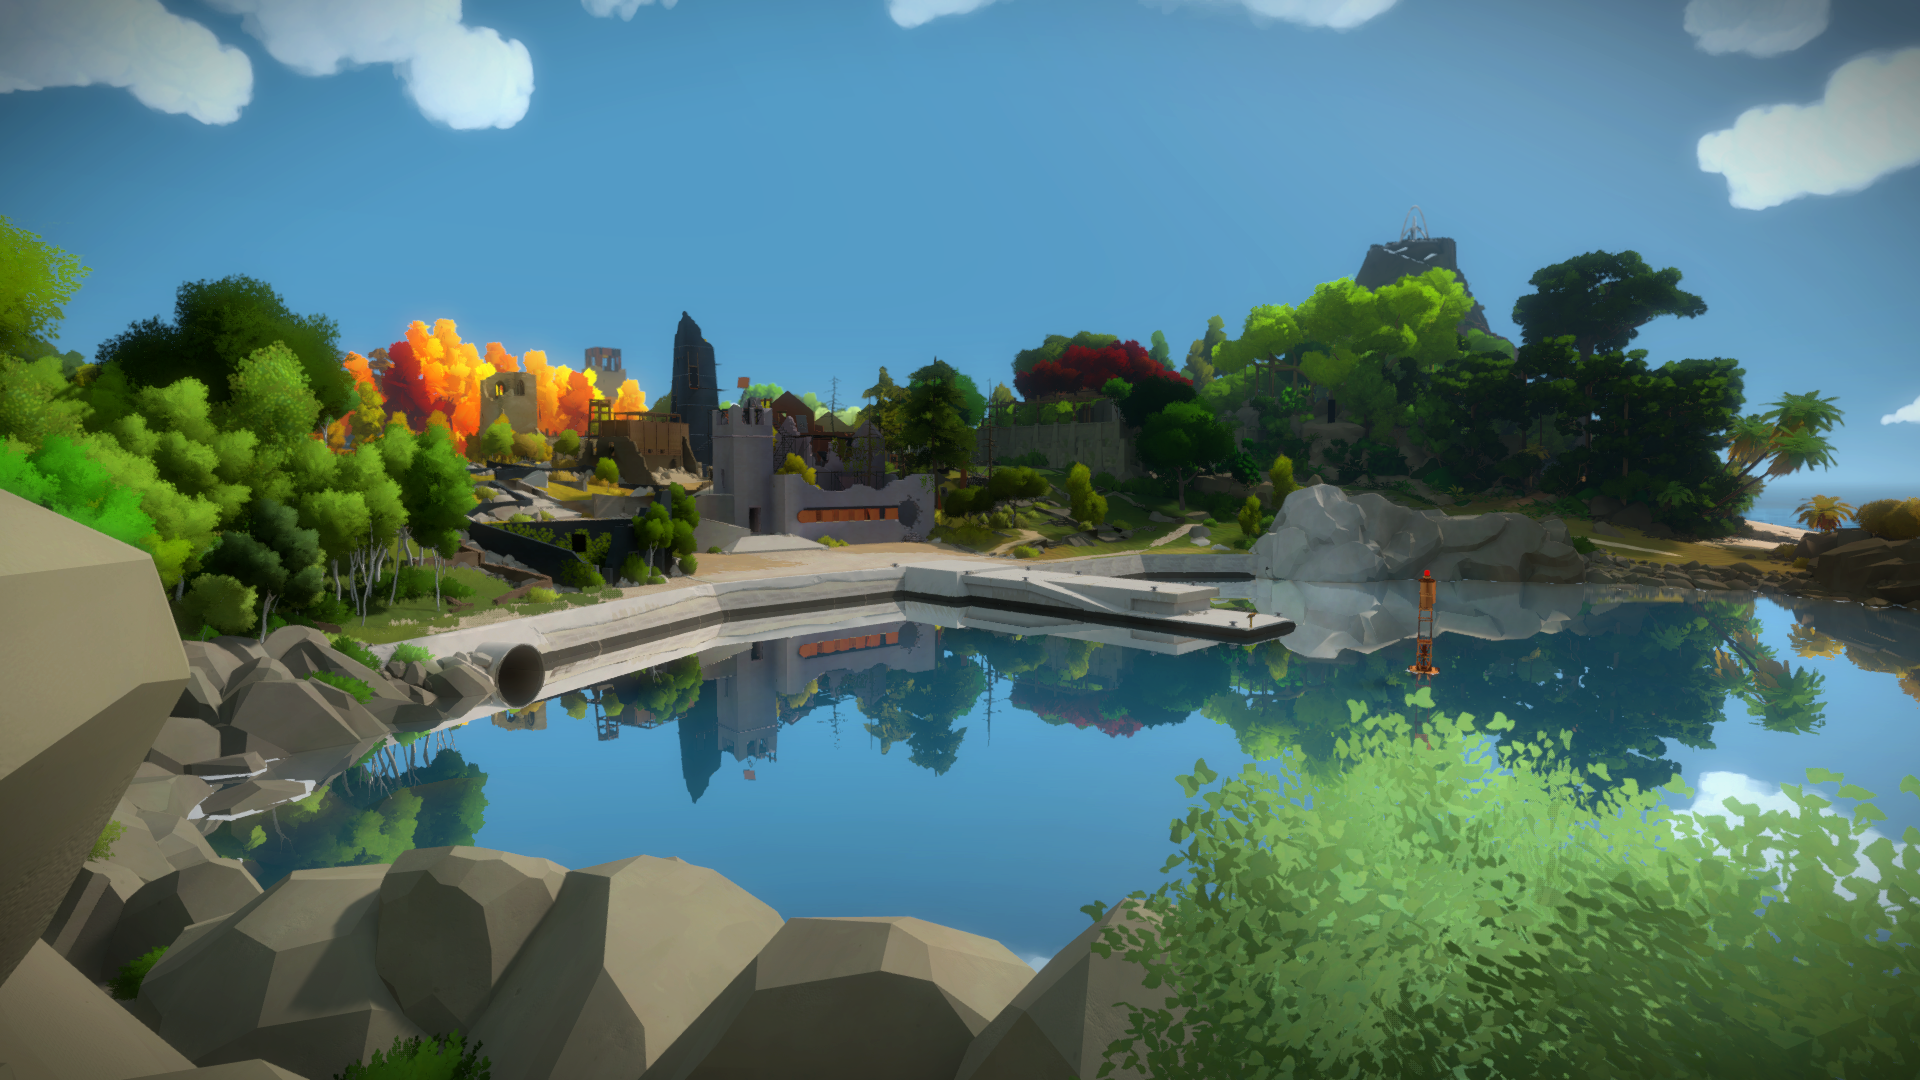 Video Game The Witness 1920x1080